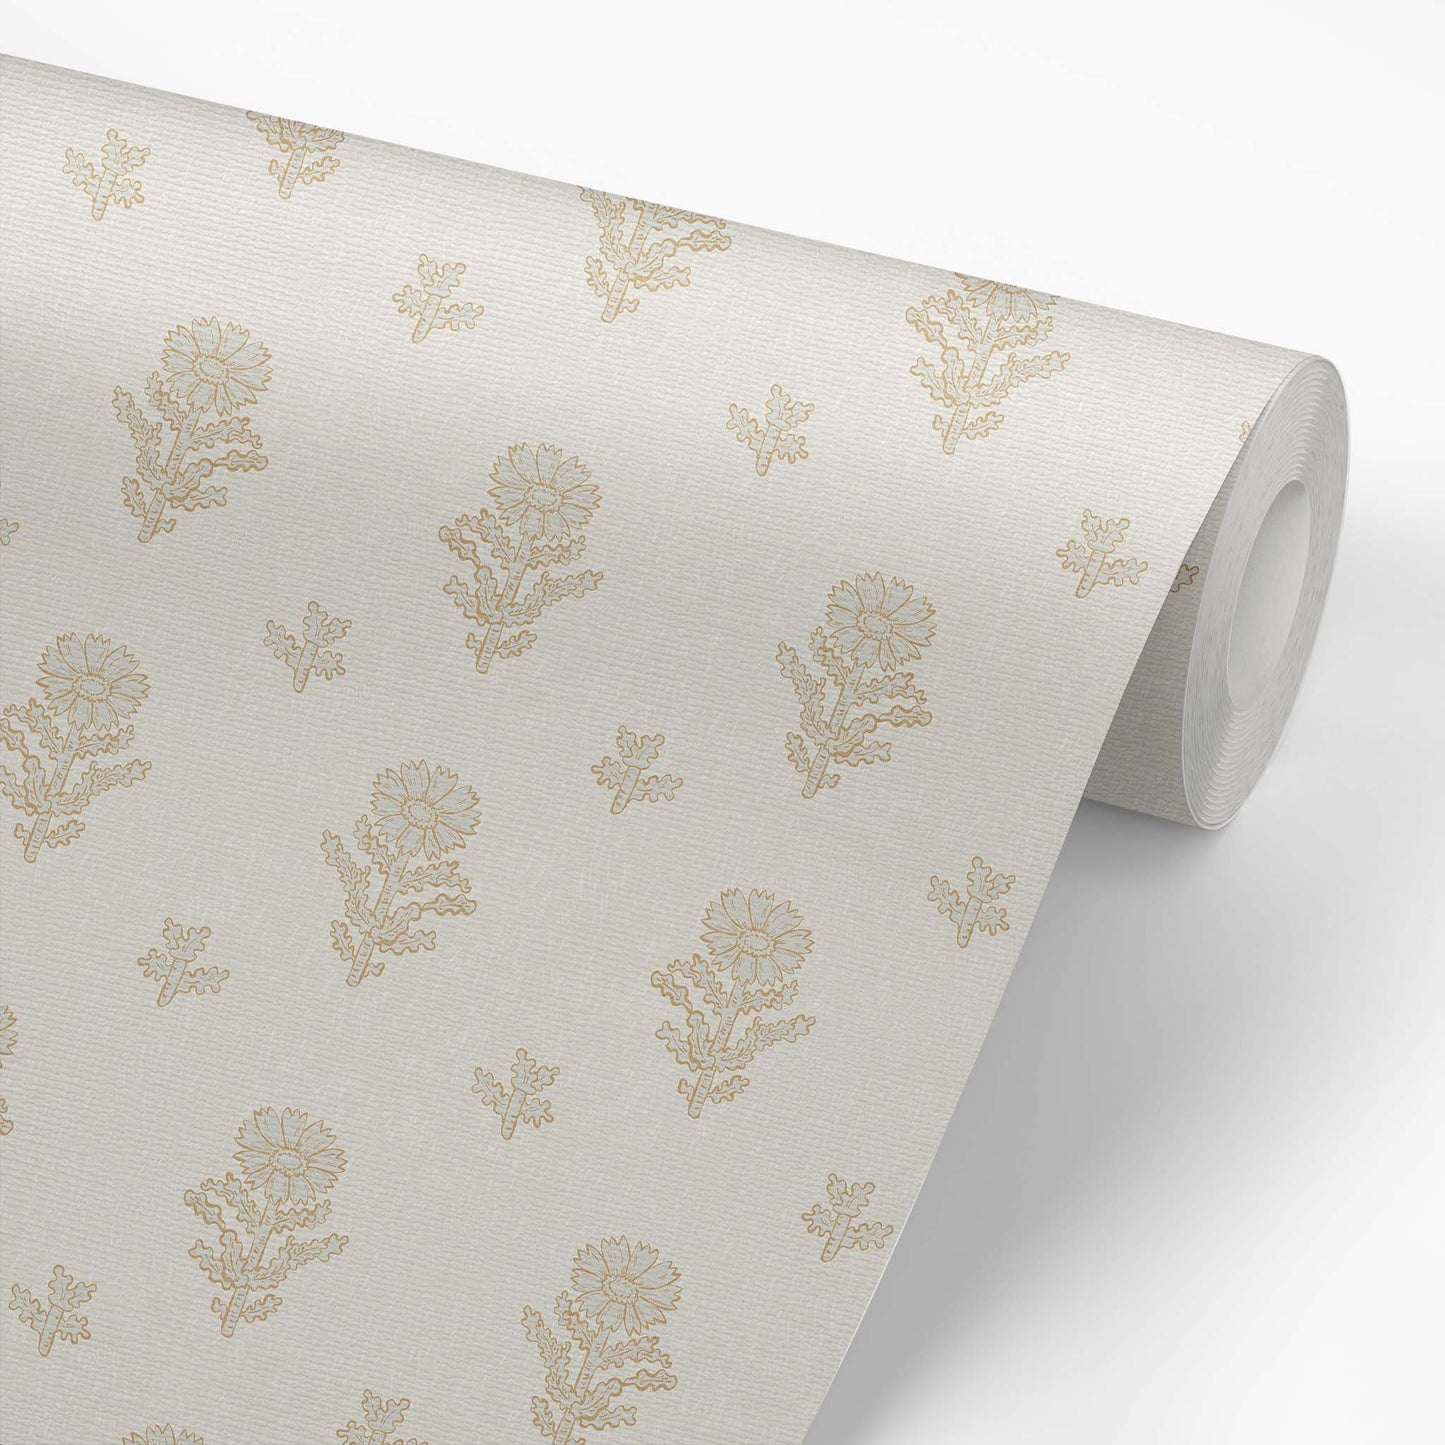 Add a touch of elegance and femininity to any room with our Small Vintage Floral Wallpaper in Bone. Drawing from classic vintage designs, this wallpaper combines delicate florals with soft, subtle tones to create an ambience of comfort and refinement.